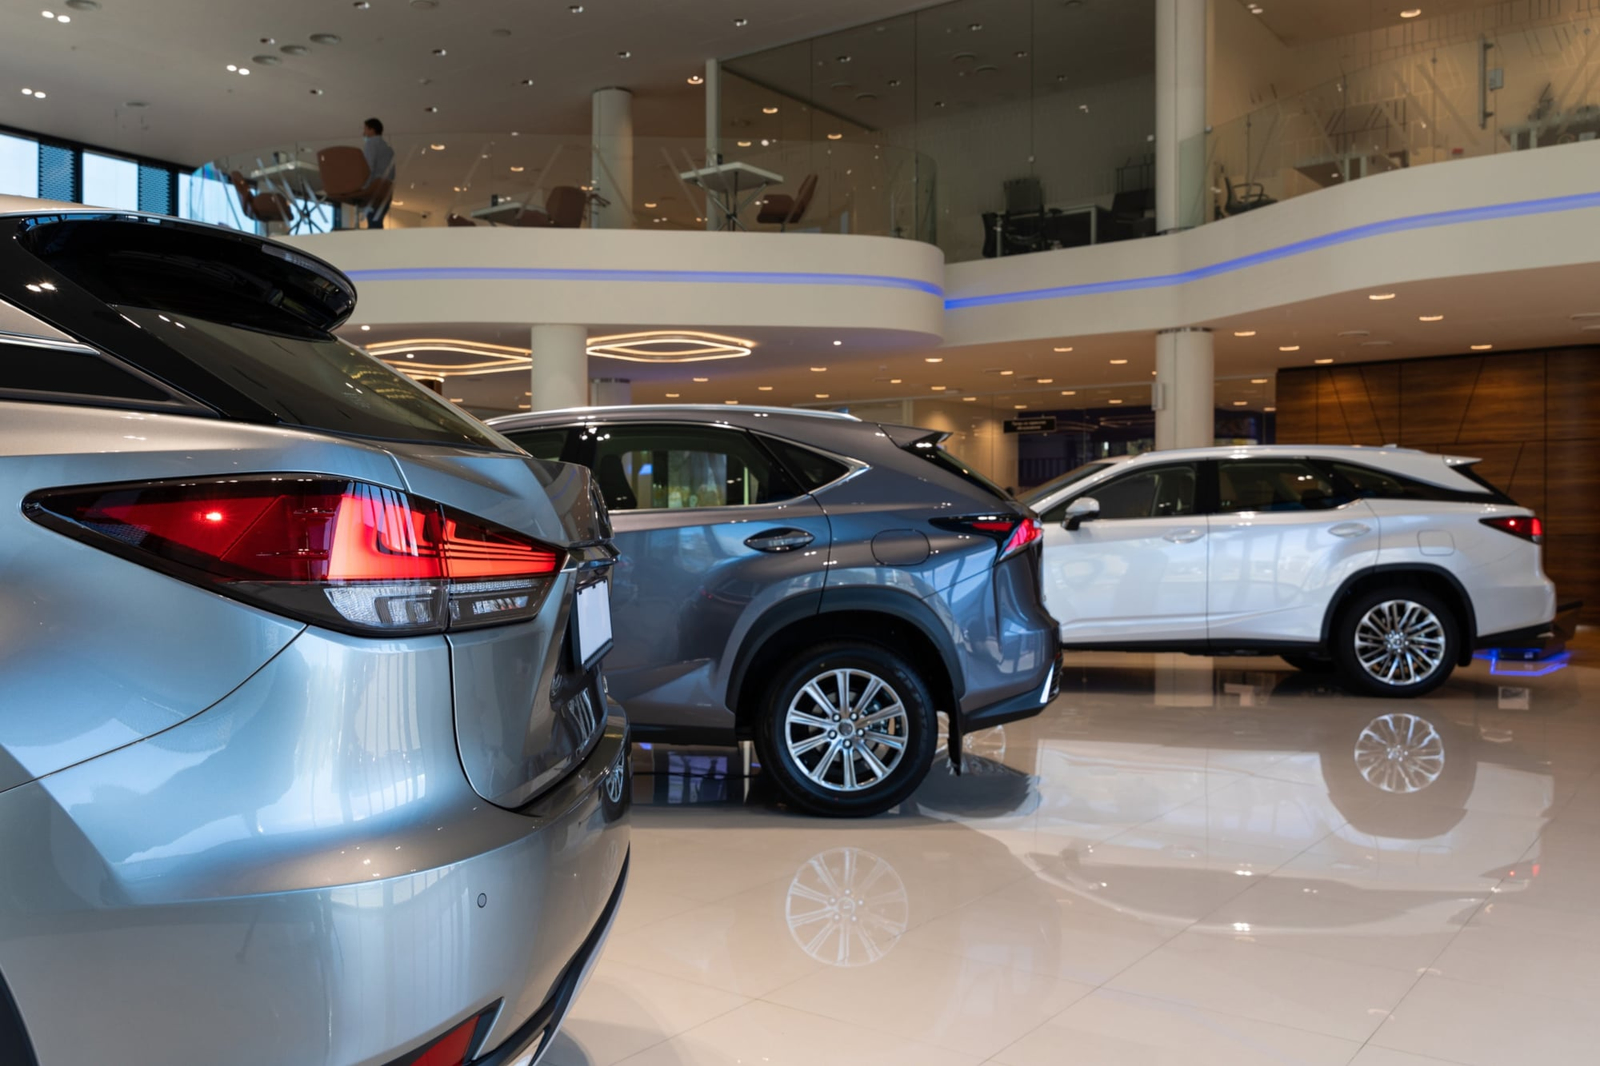 industry news, lexus and toyota achieve something at dealer level other brands don't